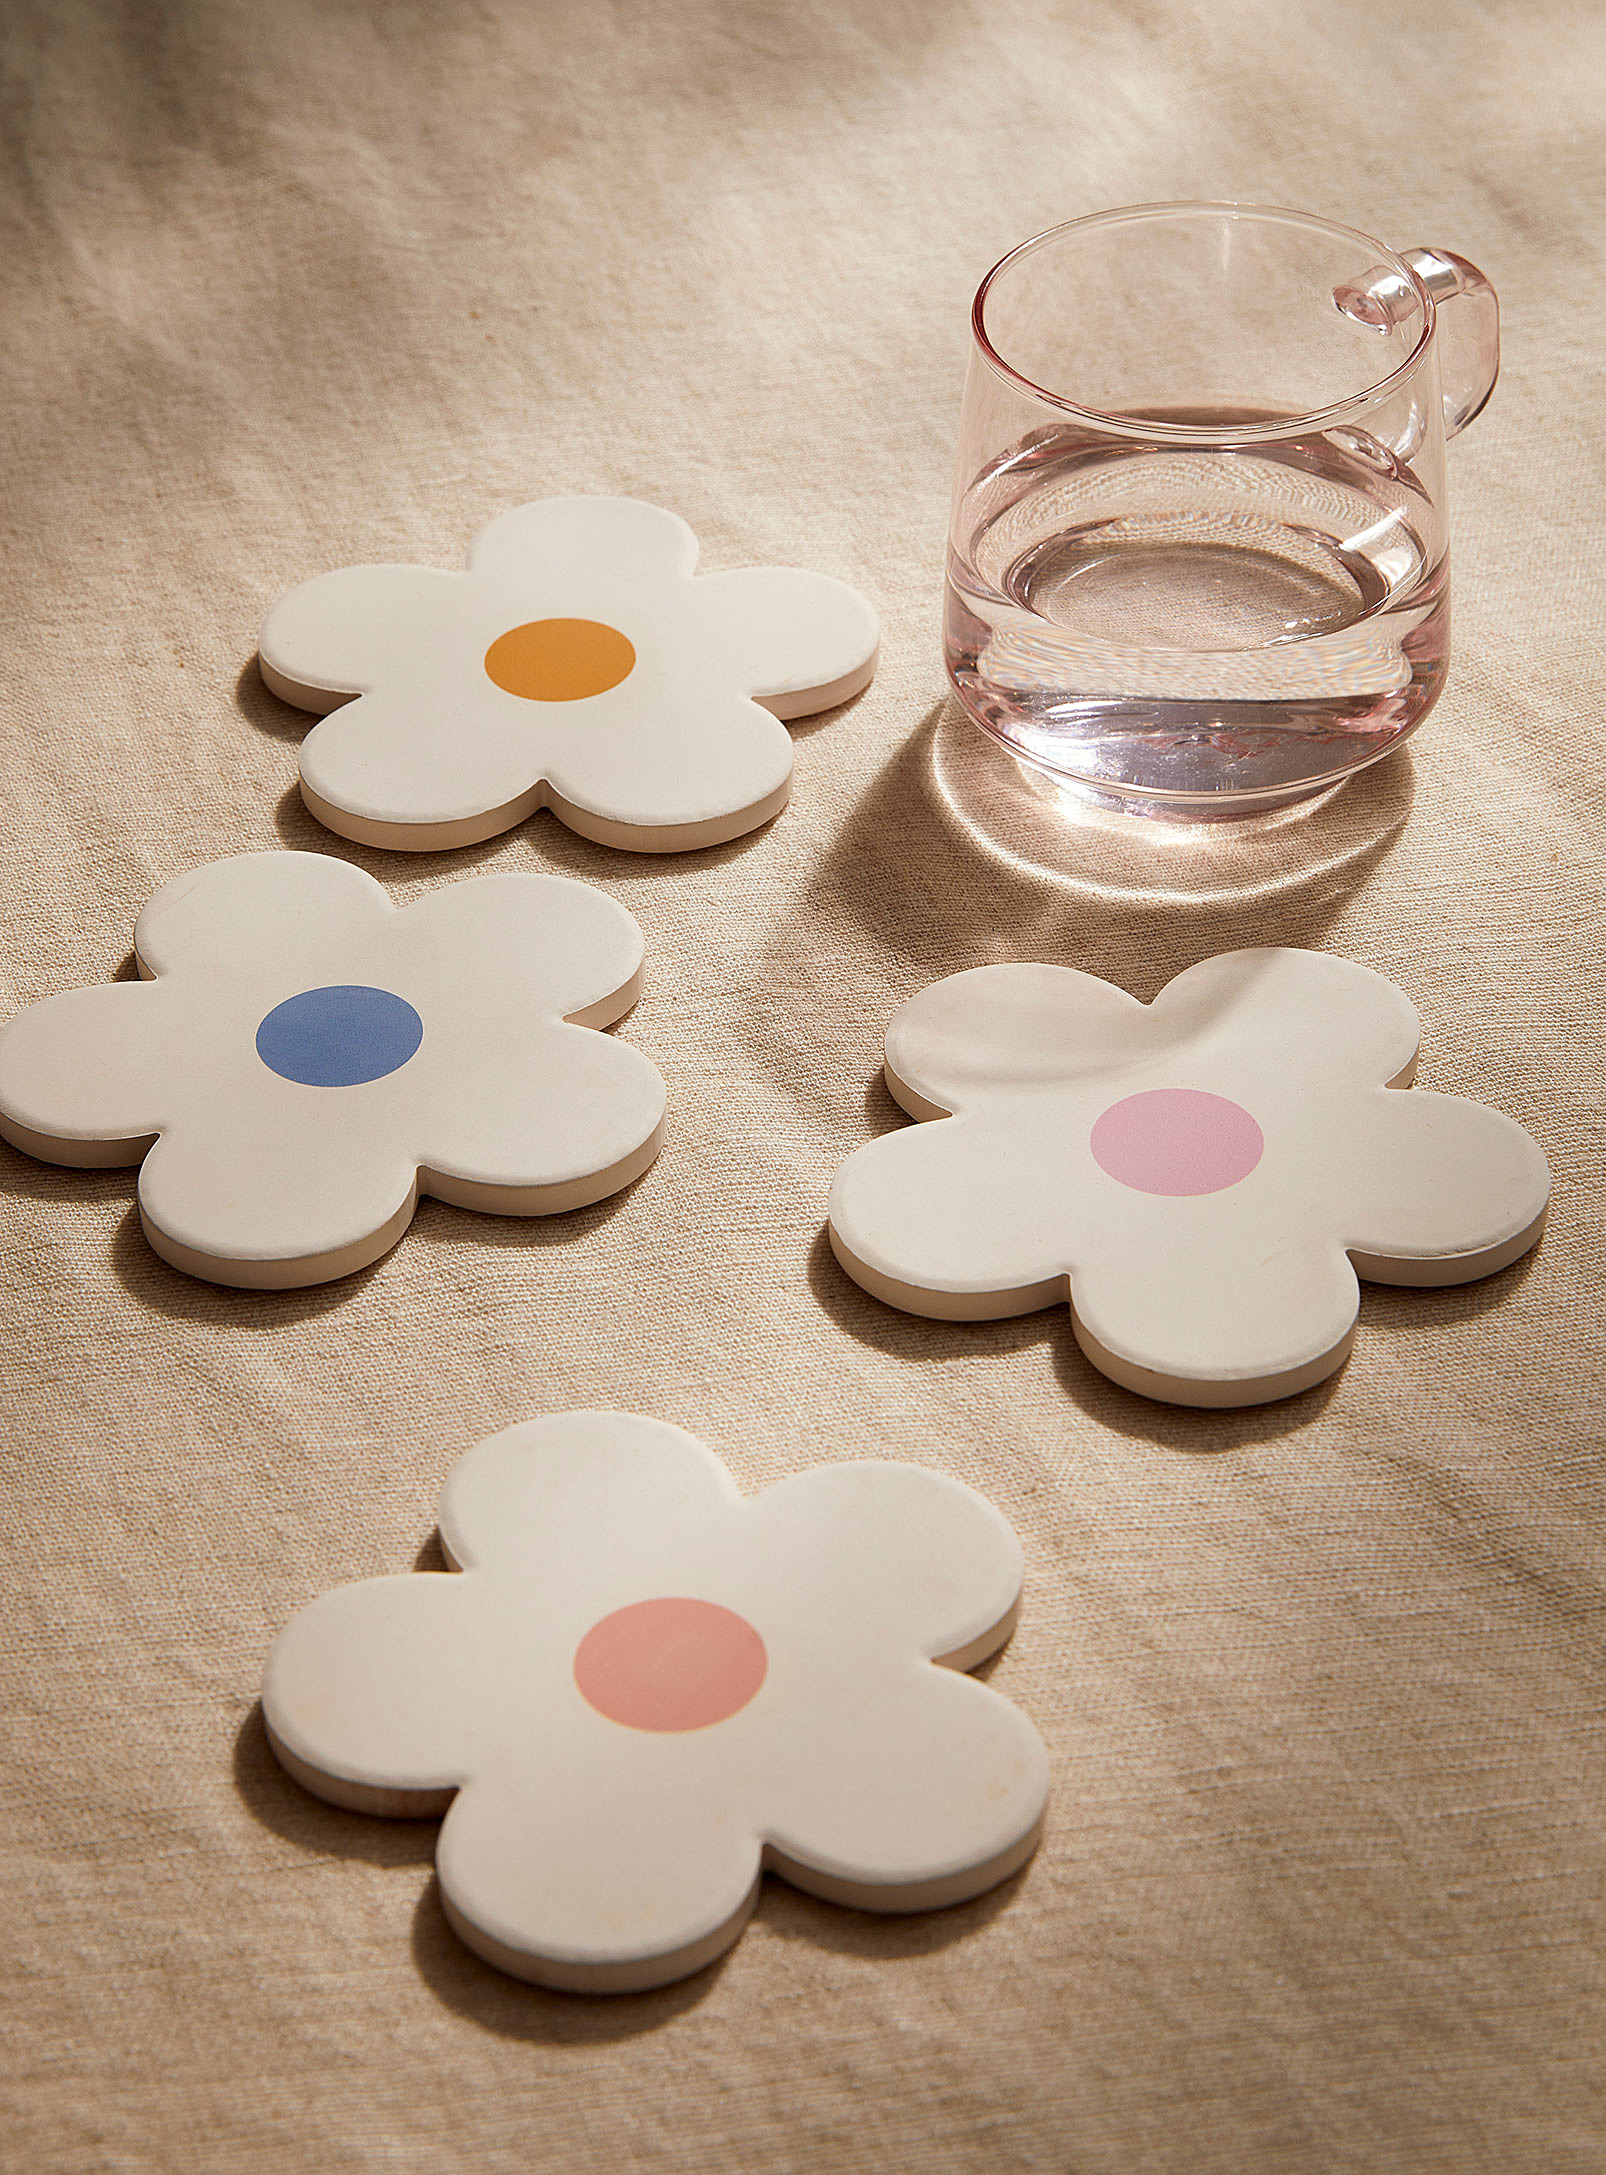 Danica Daisy Coasters Set Of 4 In Patterned White